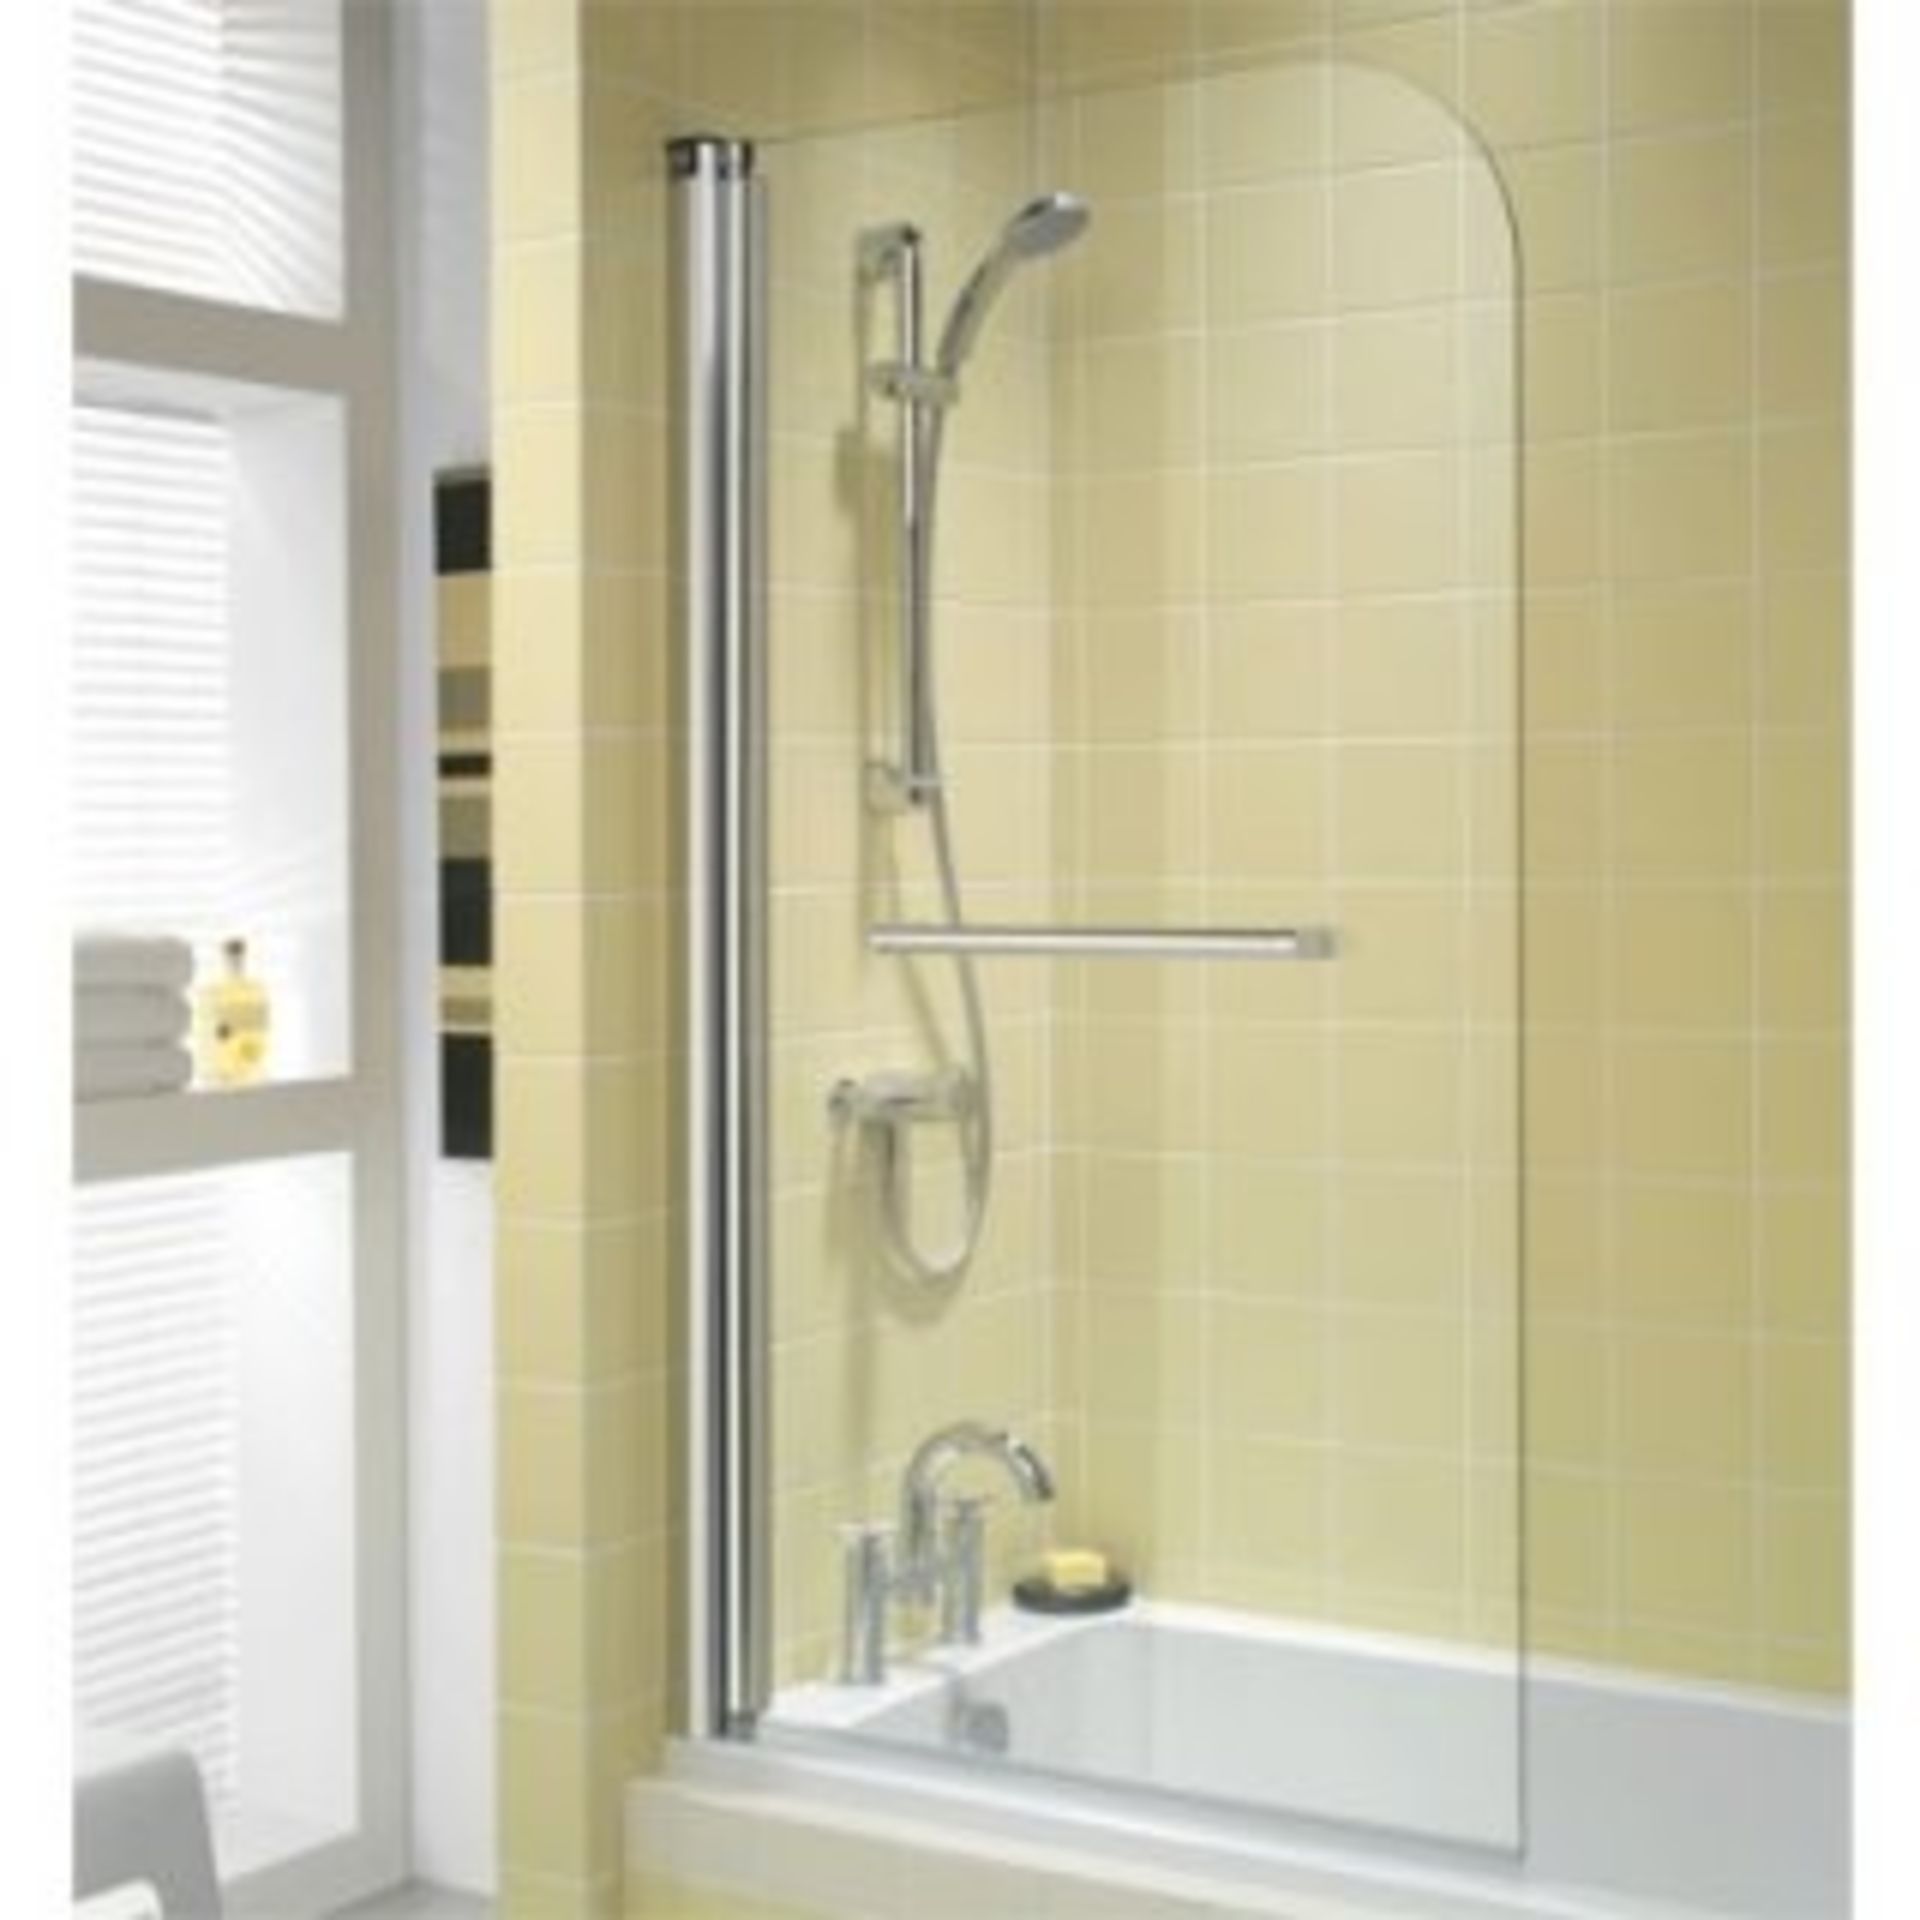 1500mm Bath Screen Left Hand. Of0968cp. Outfit Single Panel Bath Screen LH Hotels an...